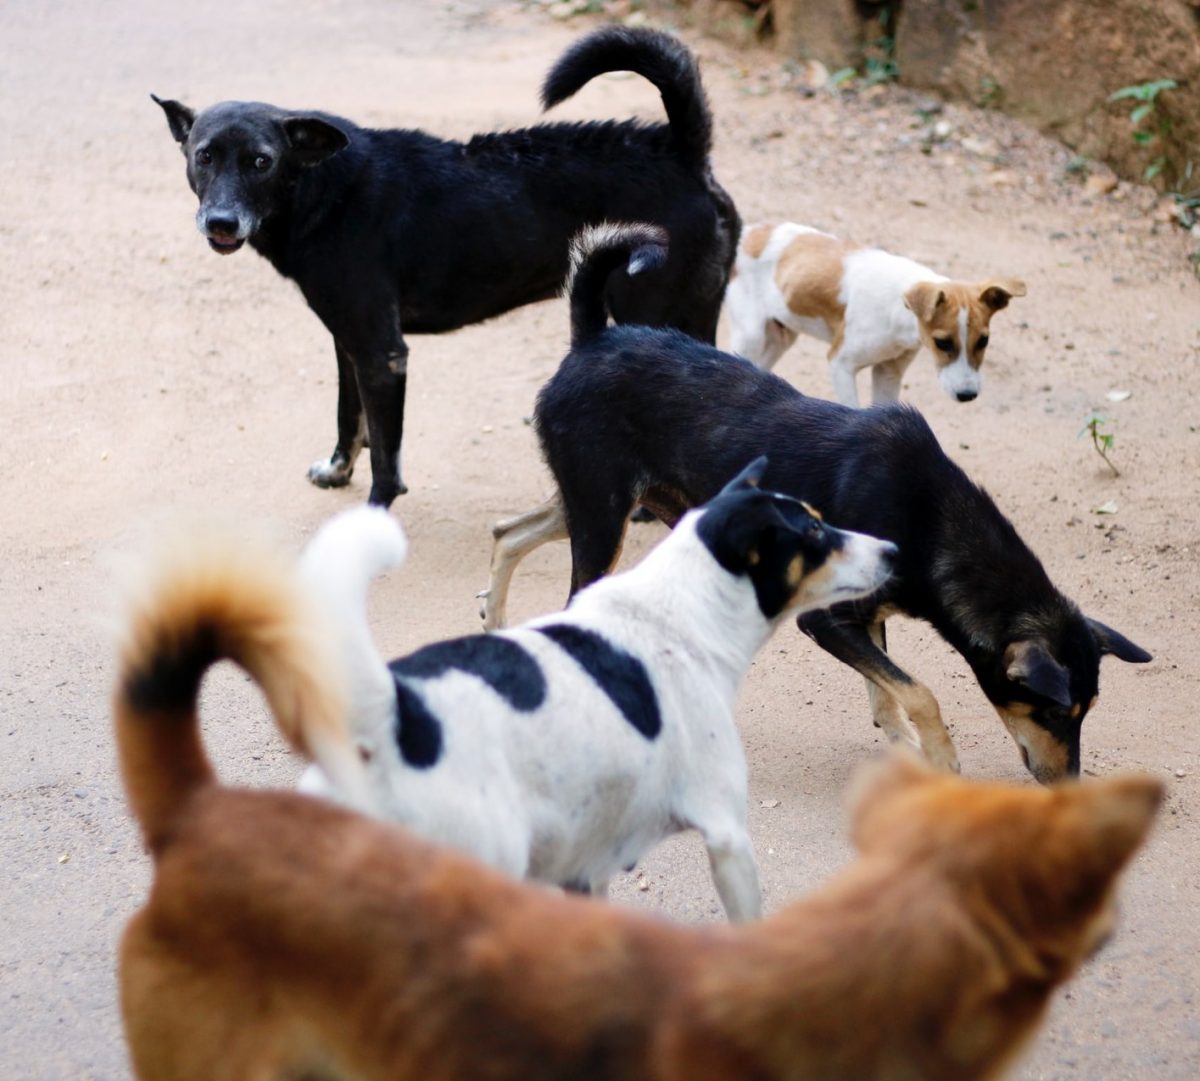 How to get rid or catch Stray Dogs